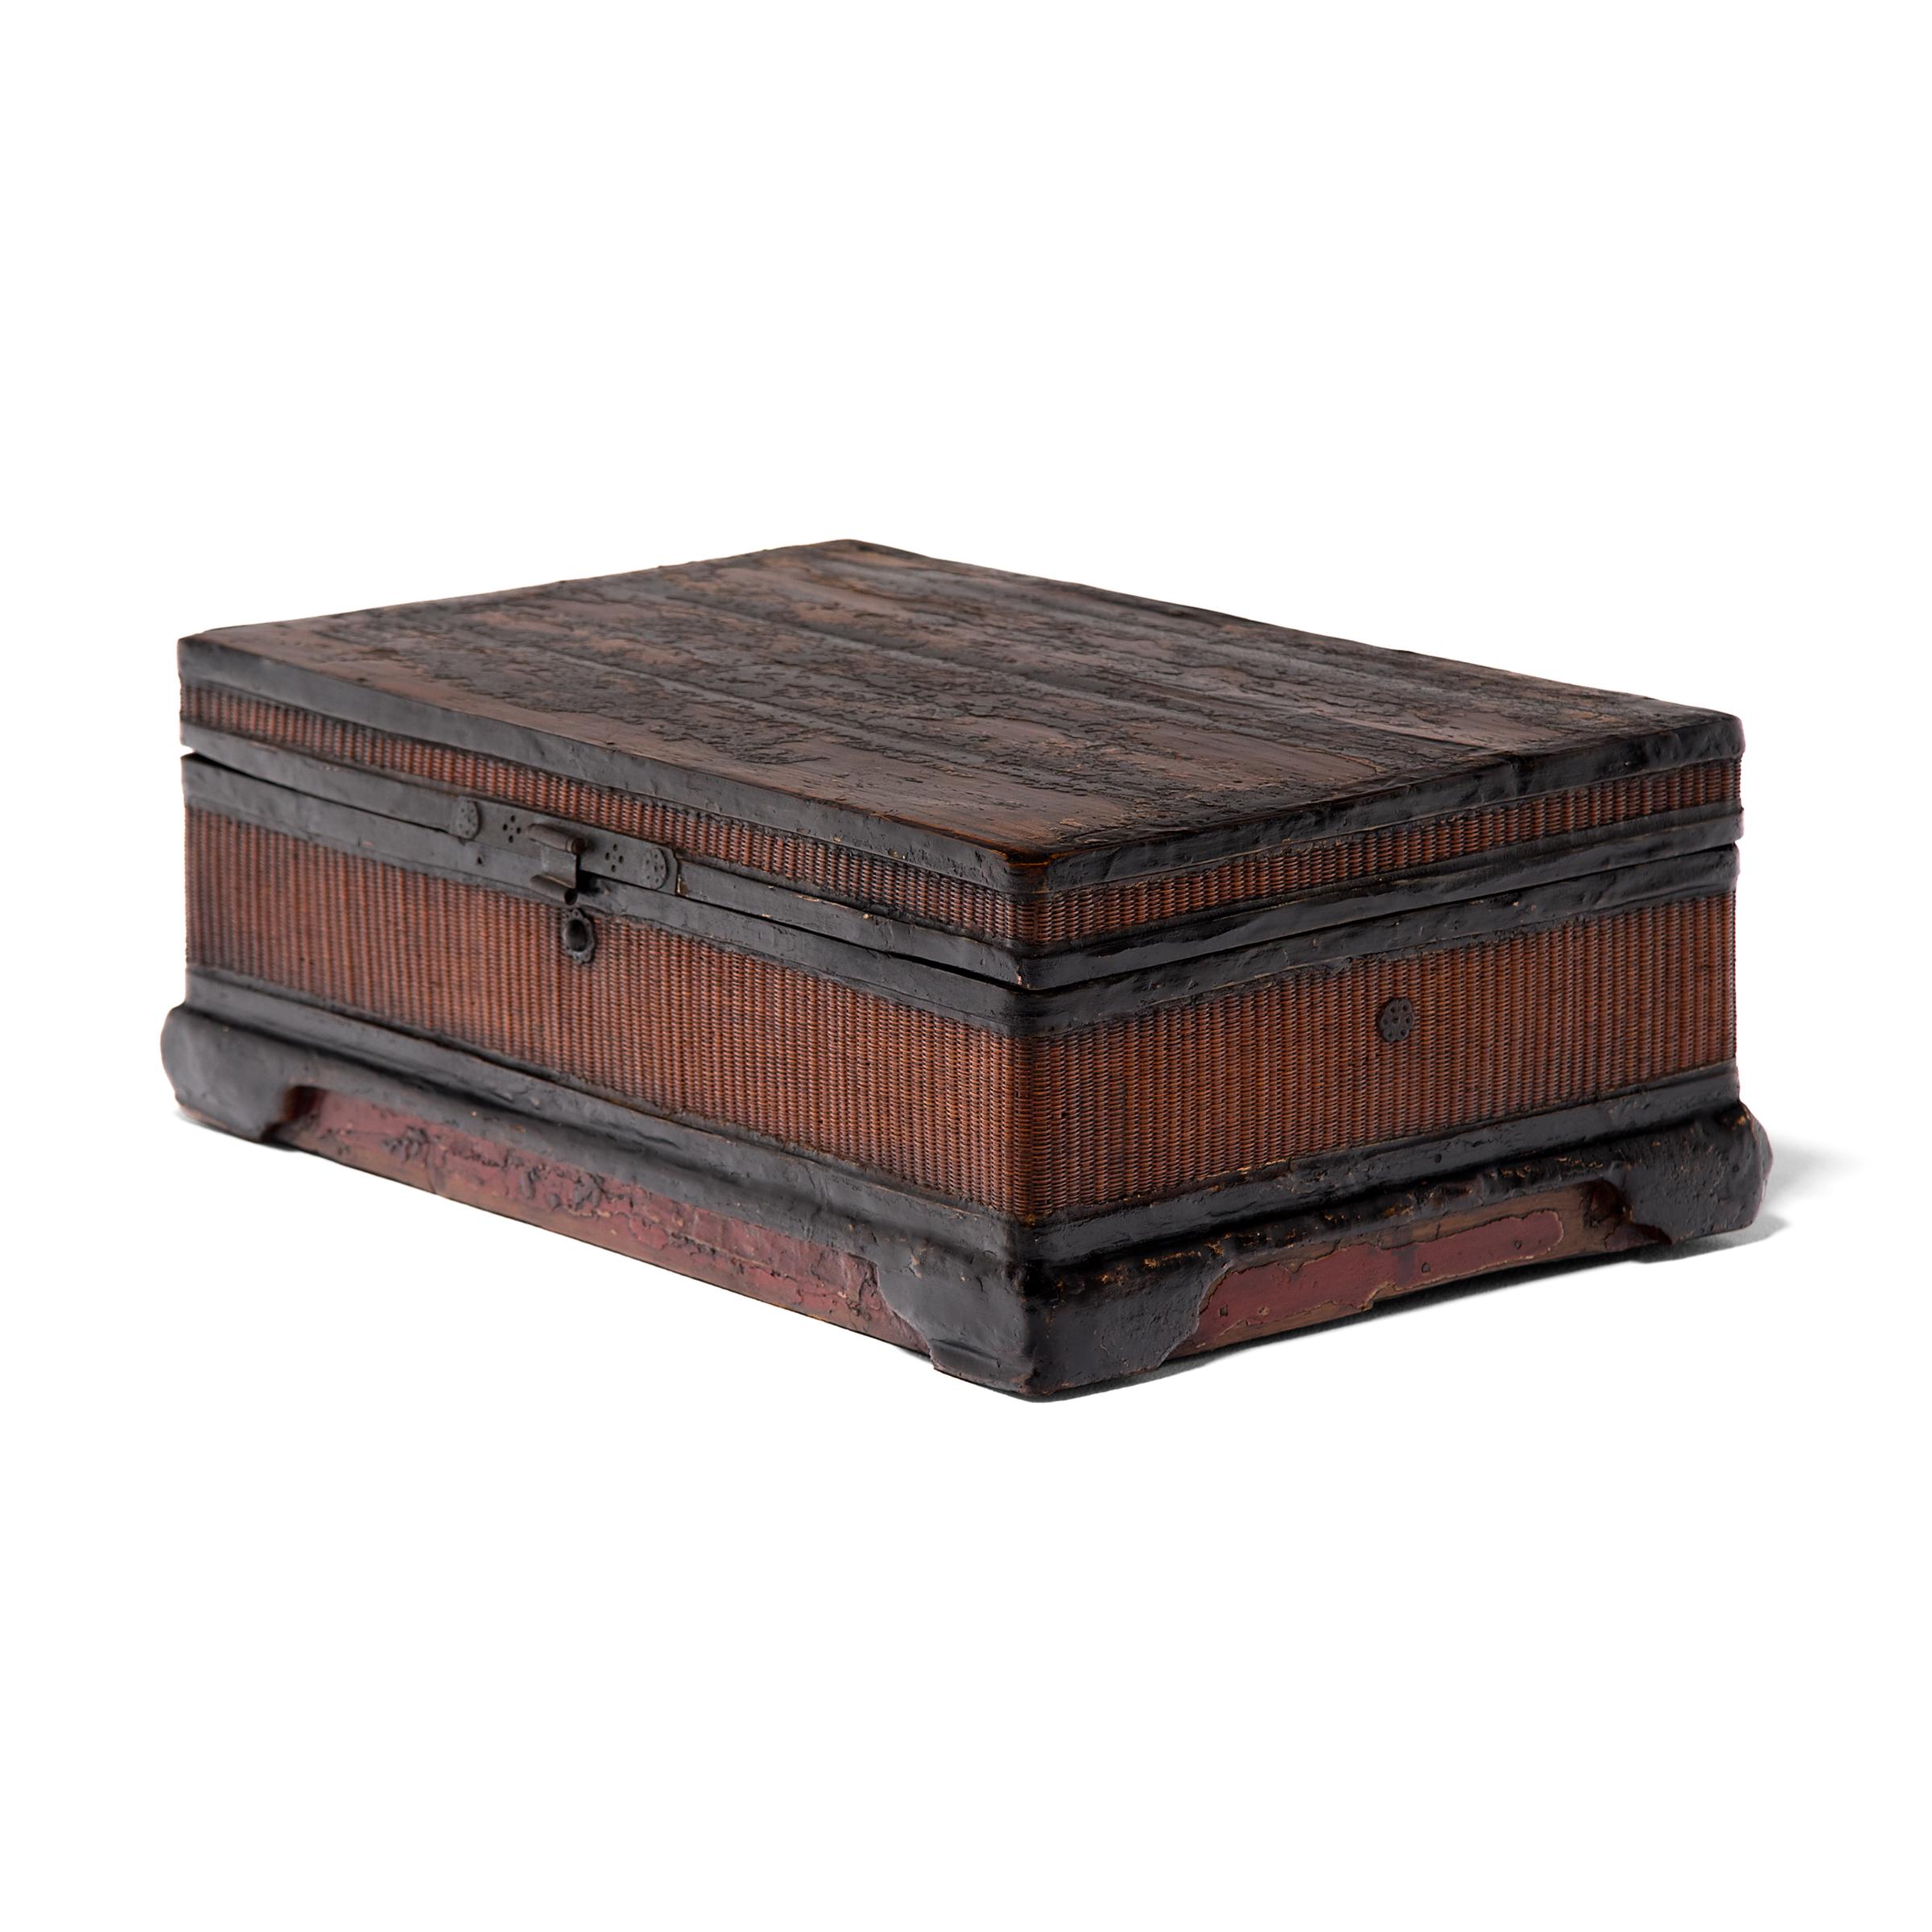 This finely woven circa 1800 trunk is a work of art in itself and was possibly used to store prized painted scrolls. A skilled artisan painstakingly wove thin-as-hair reeds to cover each panel. The top is fully detachable and maintains its original